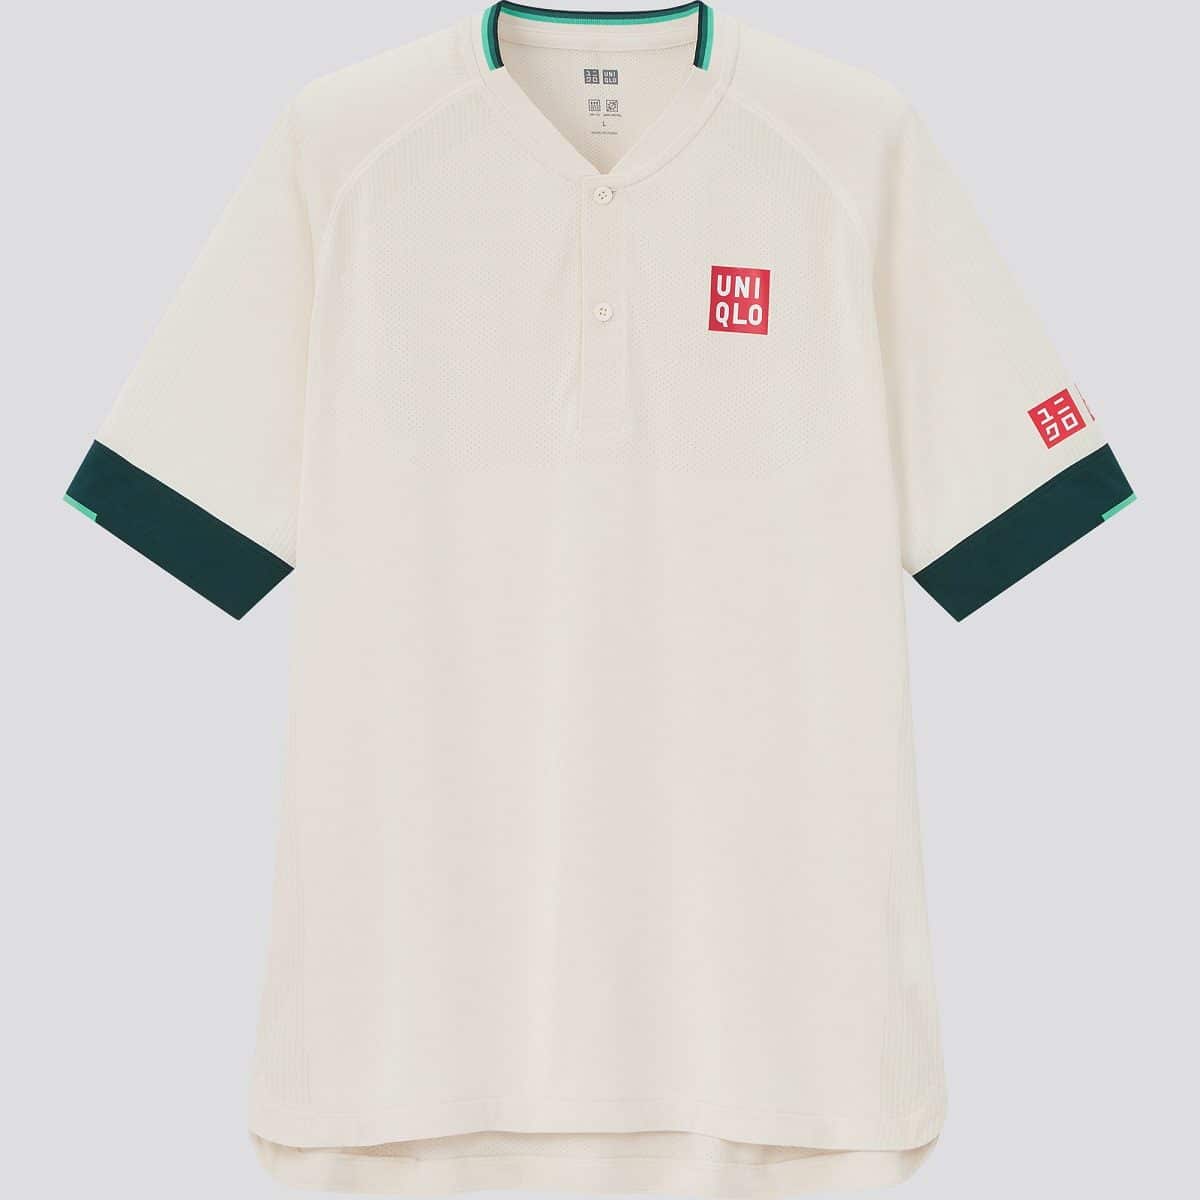 Roger Federer and Uniqlo new capsule